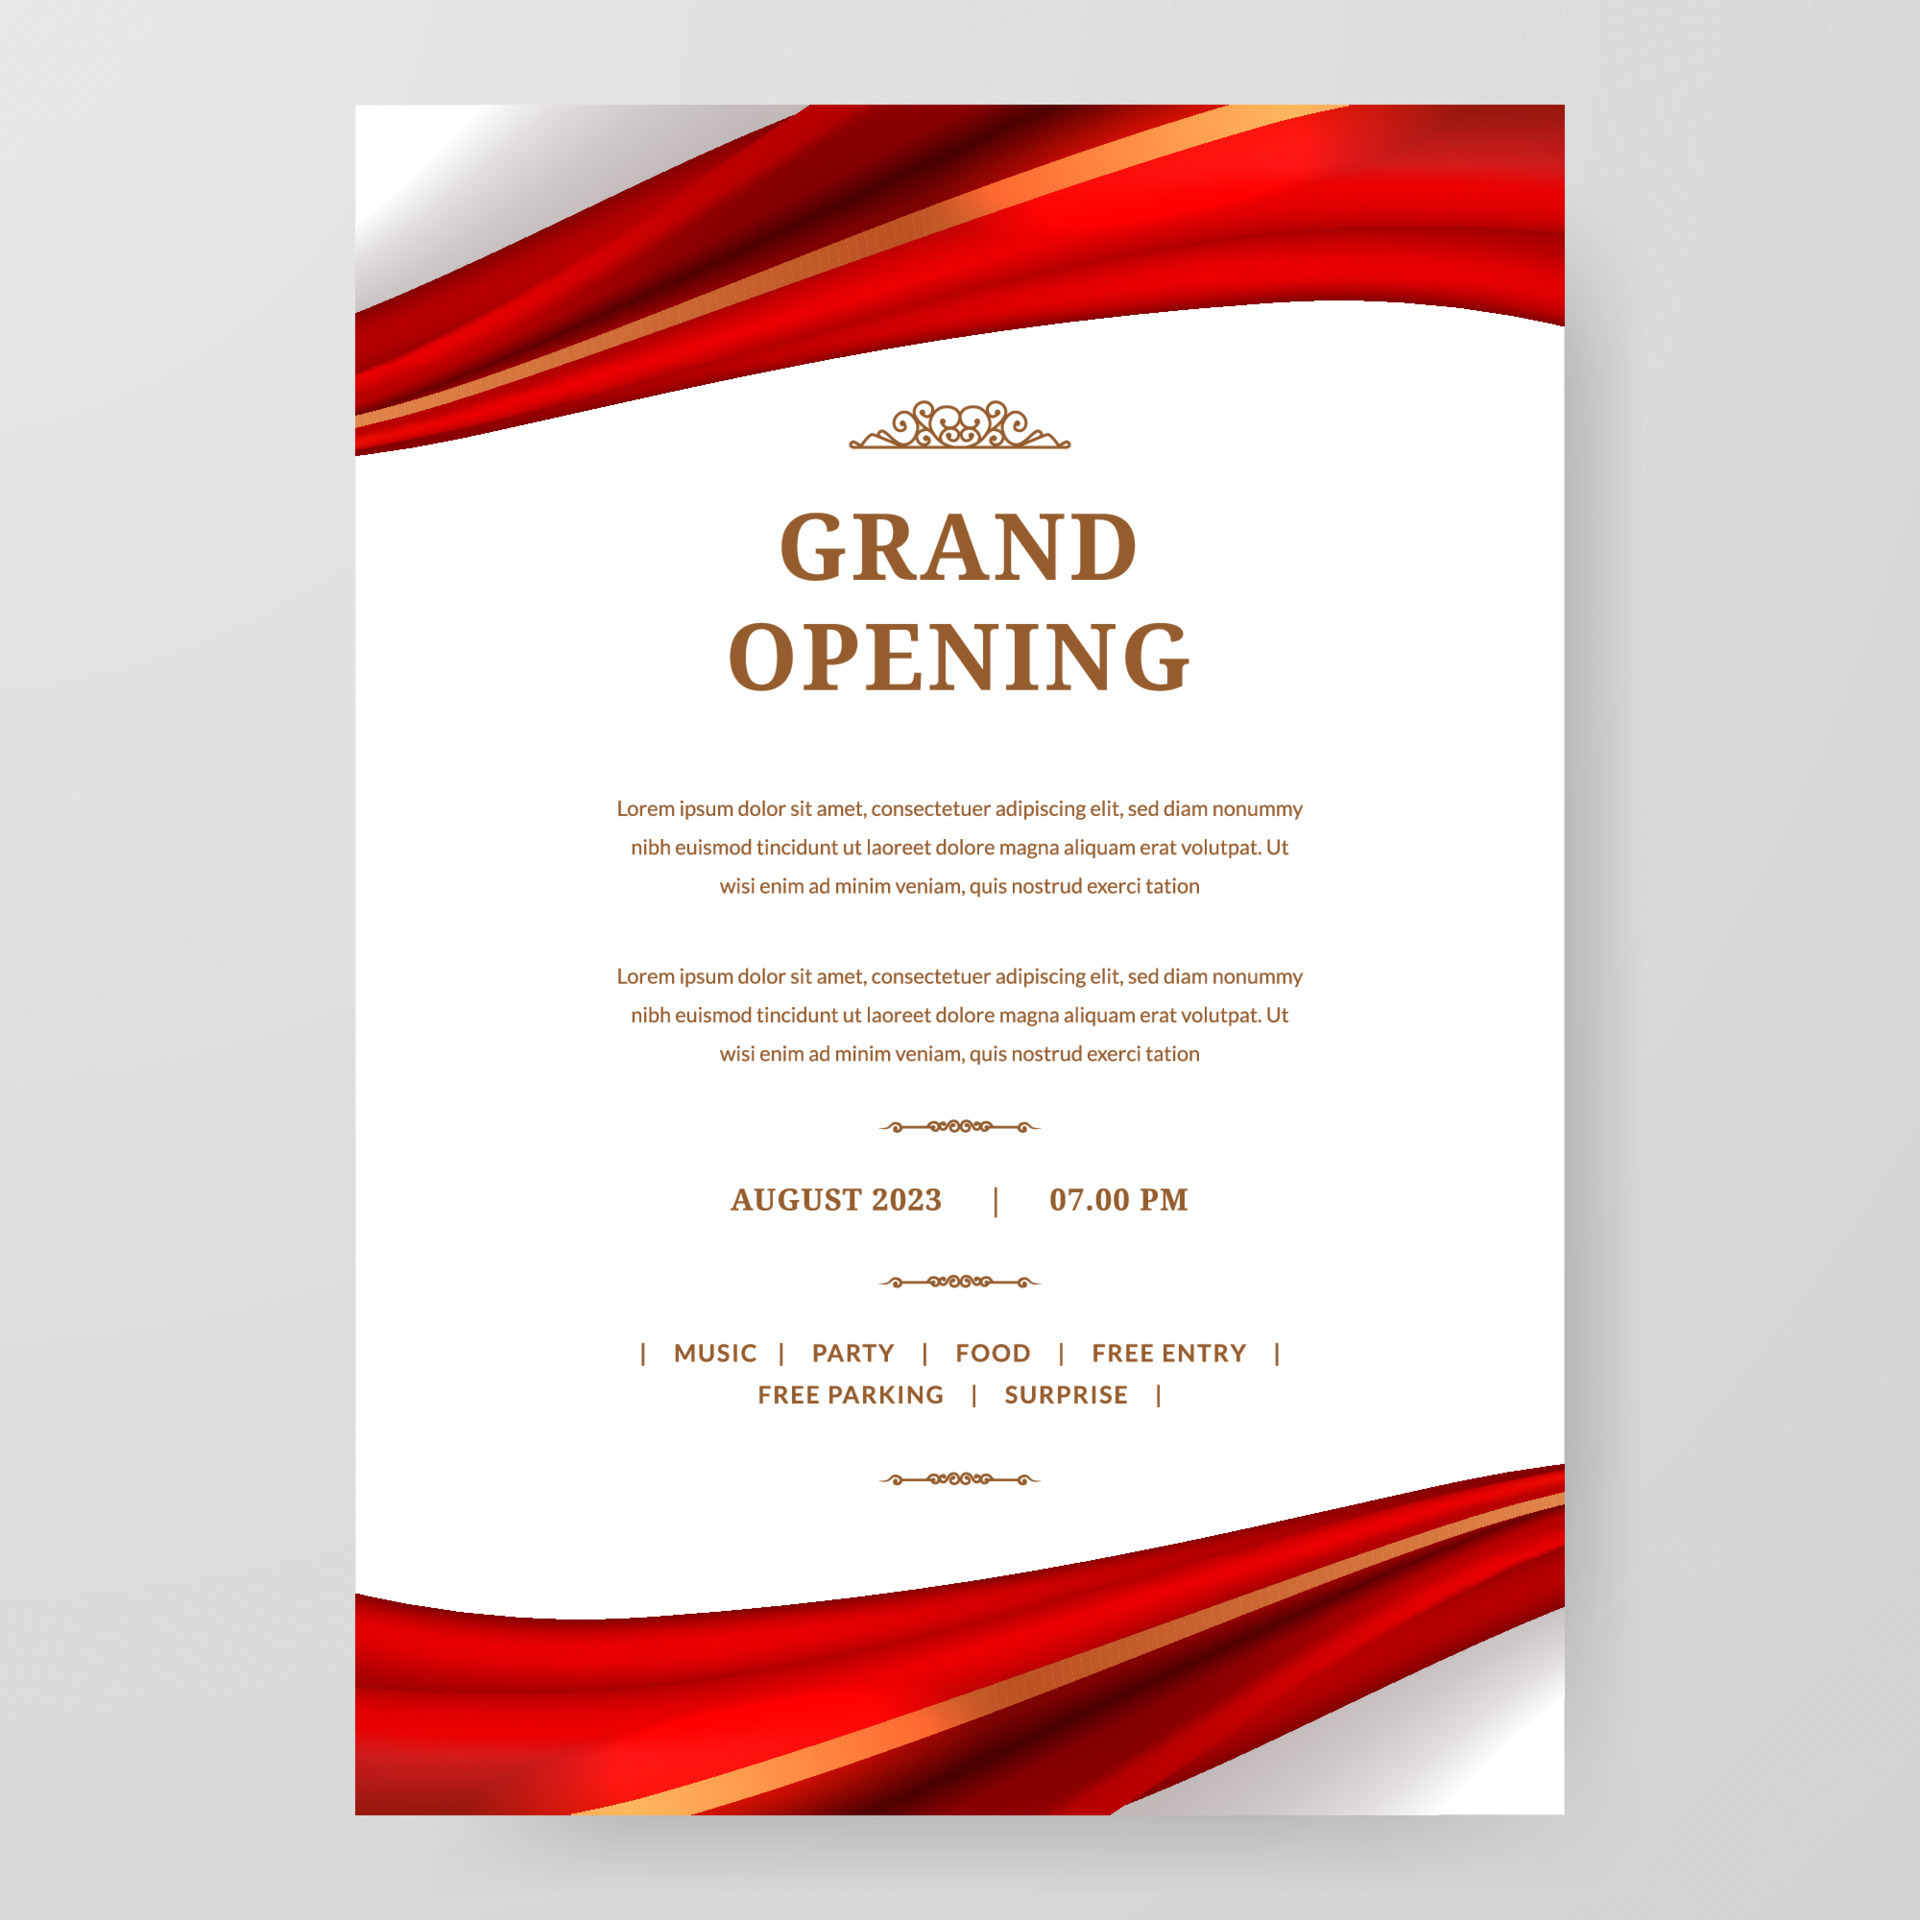 Download the Grand Opening ceremony red silk ribbon frame 1750756